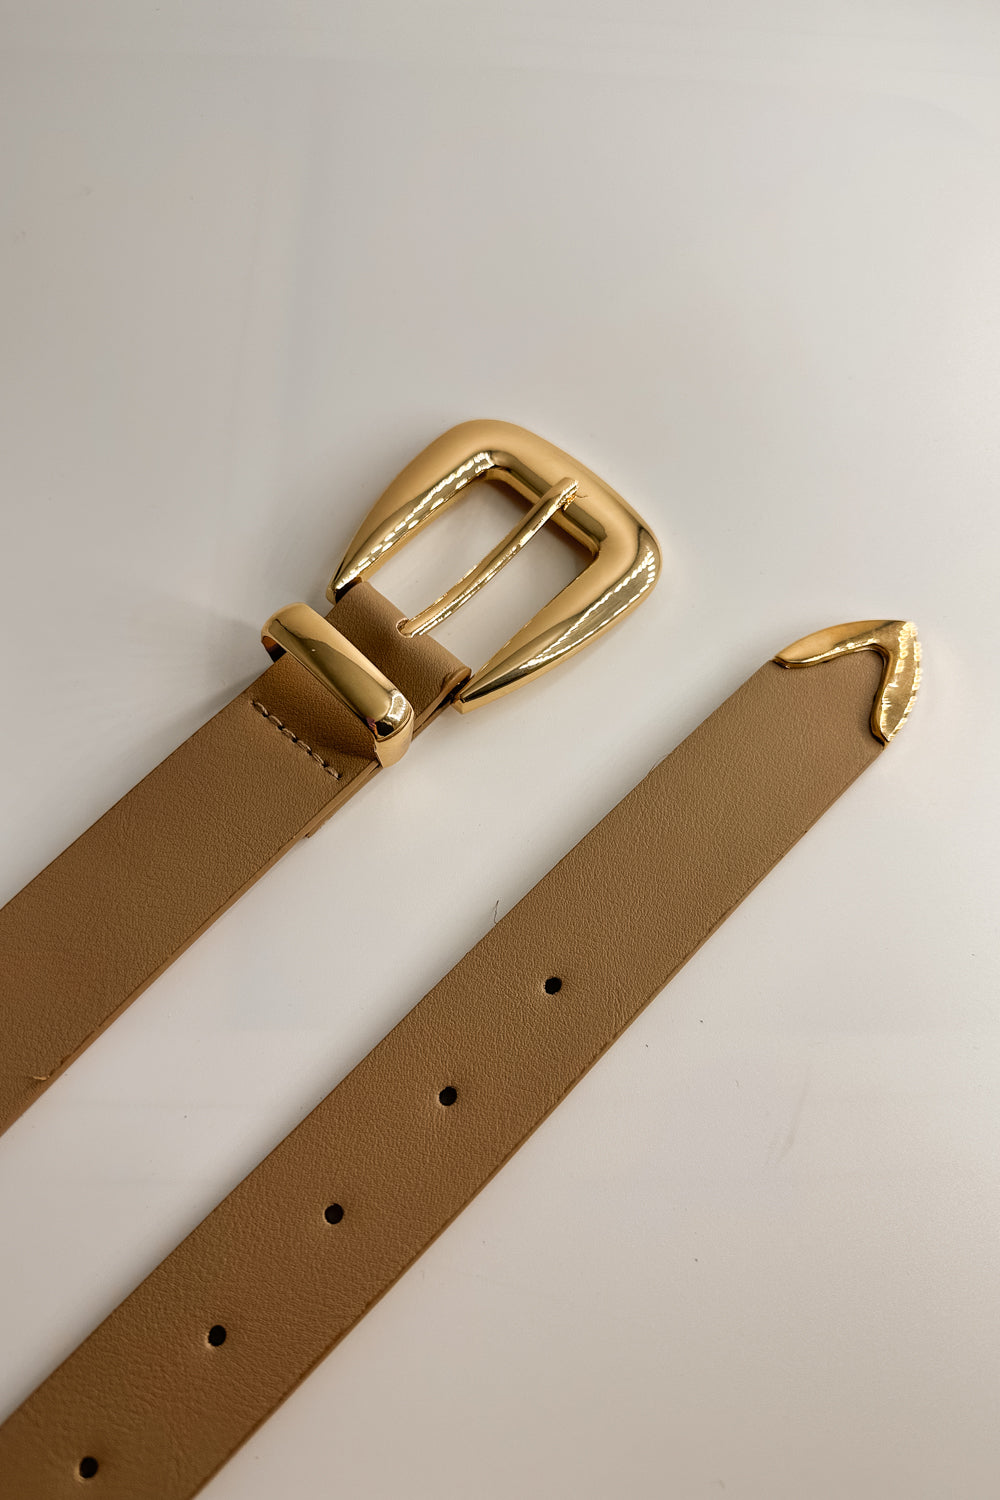 Flat Lay view of the Lucia Taupe Western Adjustable Belt which features aupe Leather Fabric, Gold Adjustable Buckle and Gold Western Detail